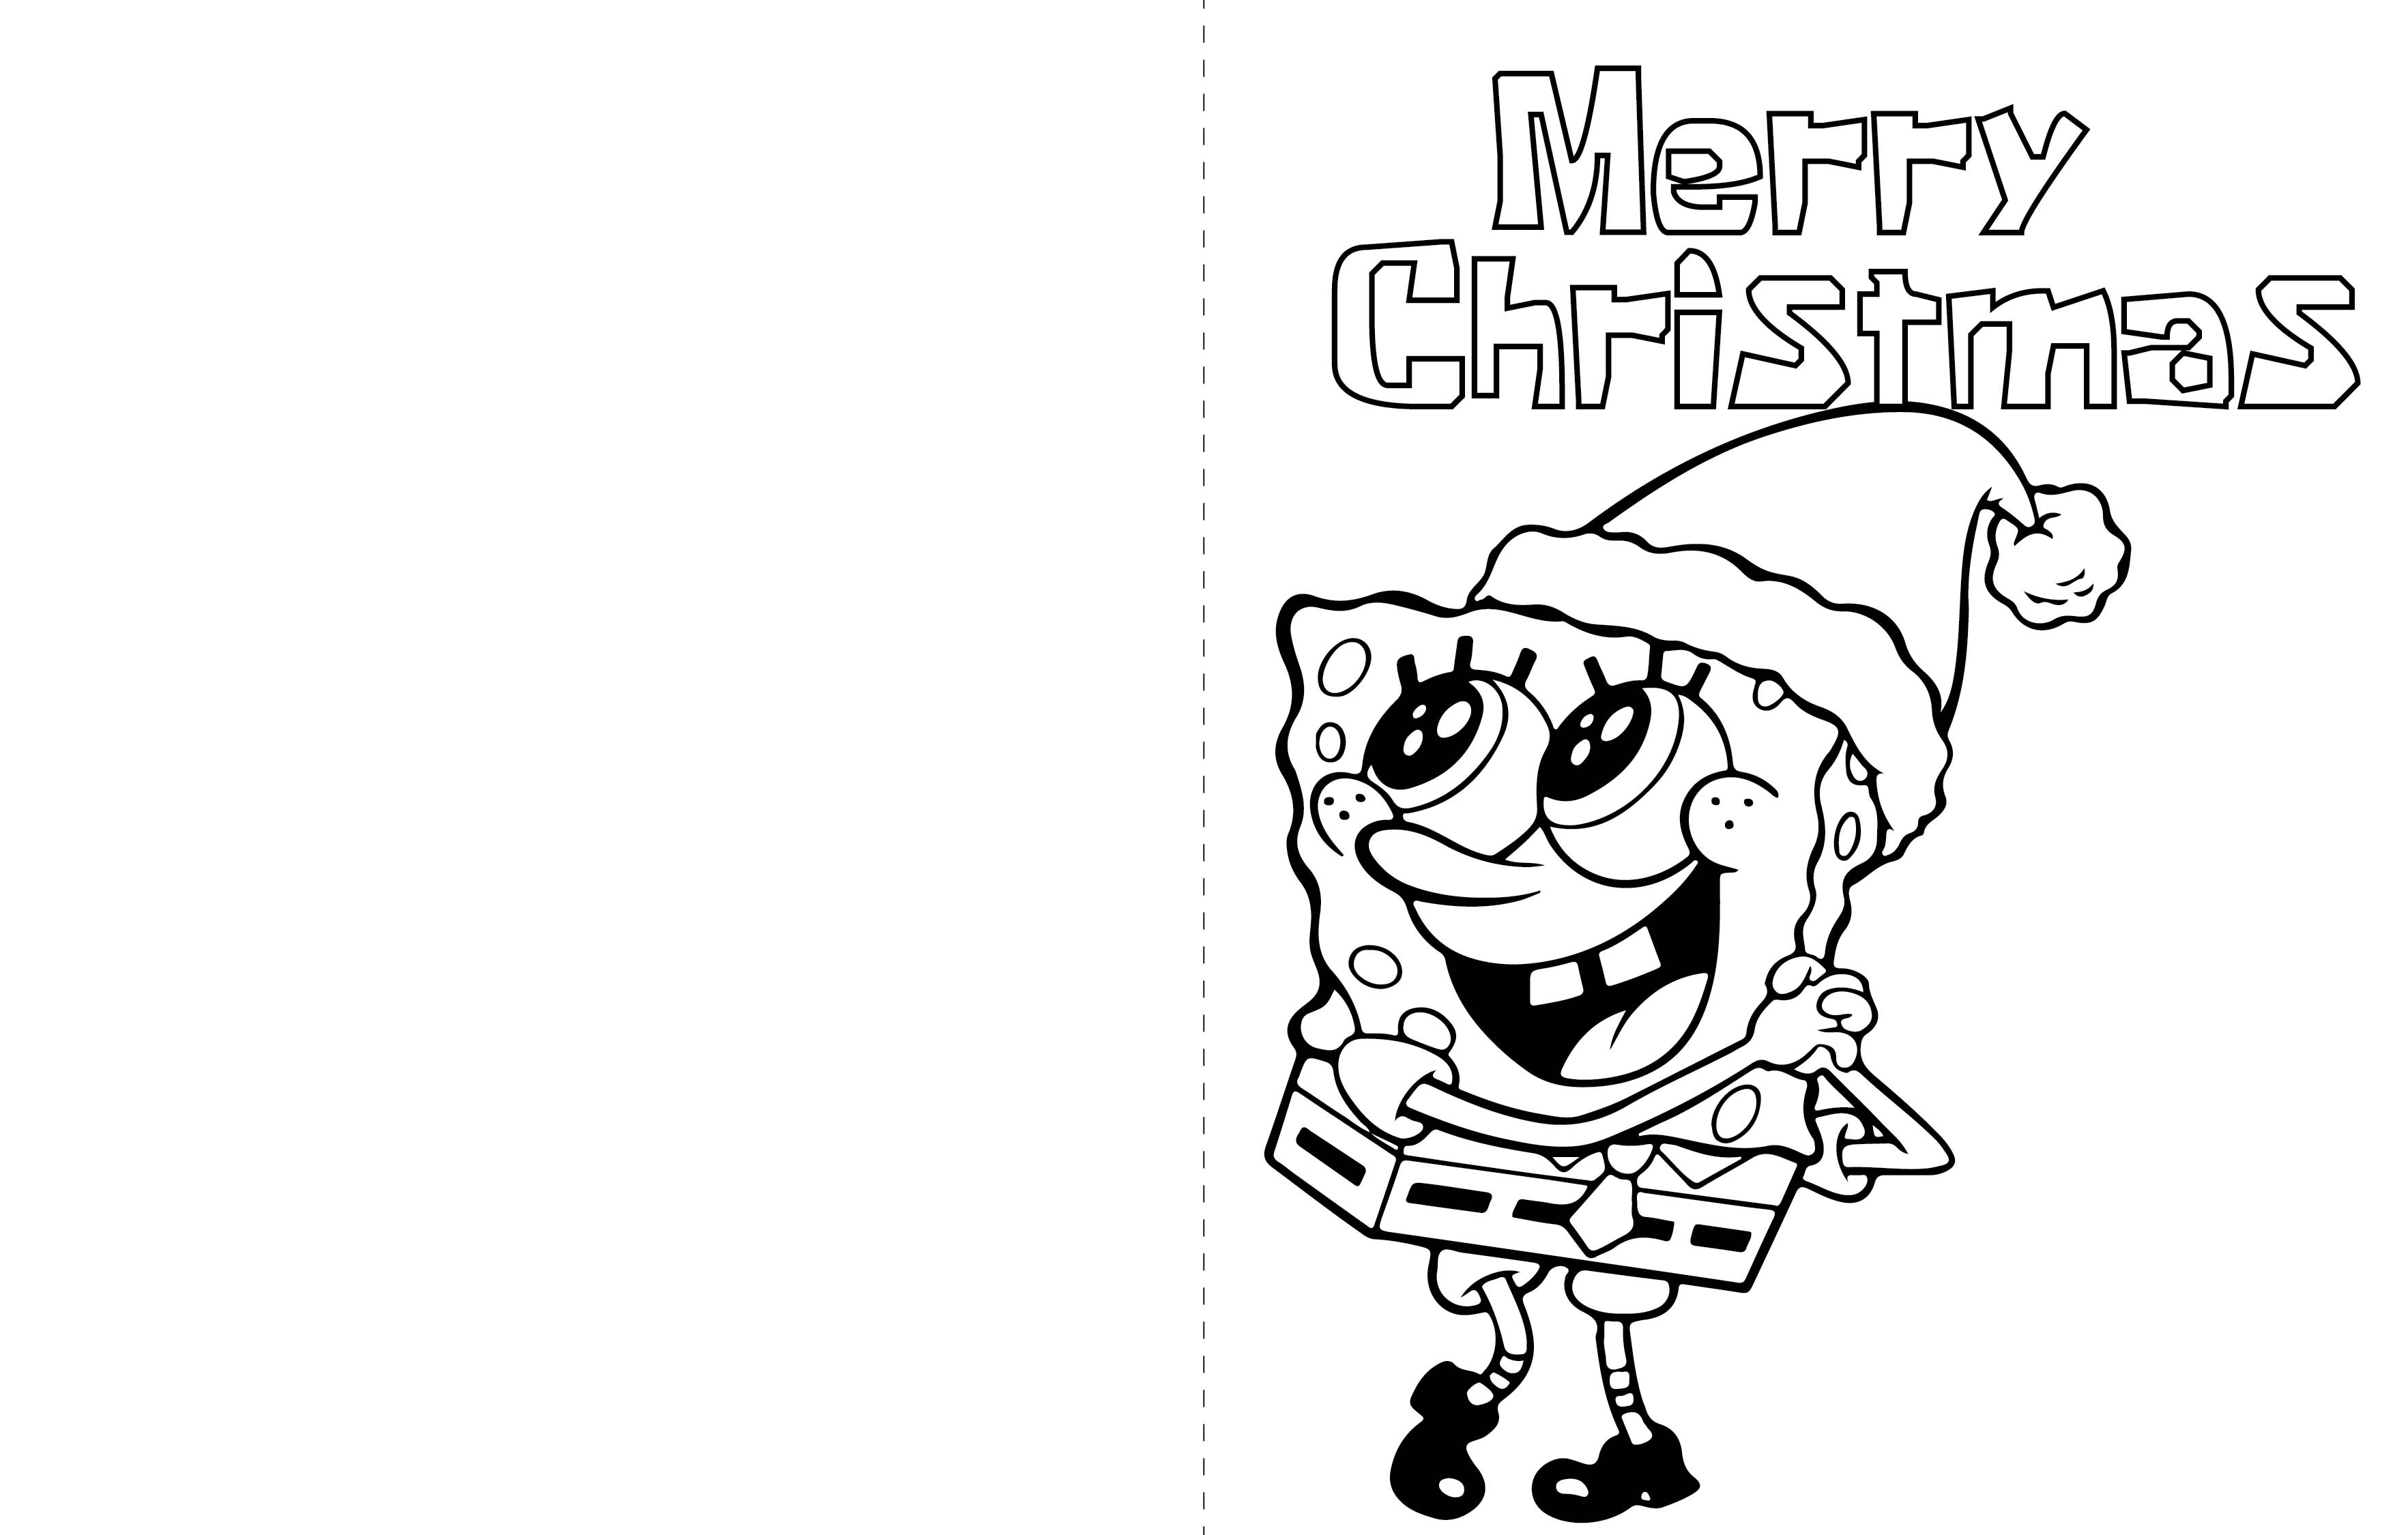 christmas-cards-colouring-pictures-10-best-free-printable-christmas-cards-you-can-color-radar